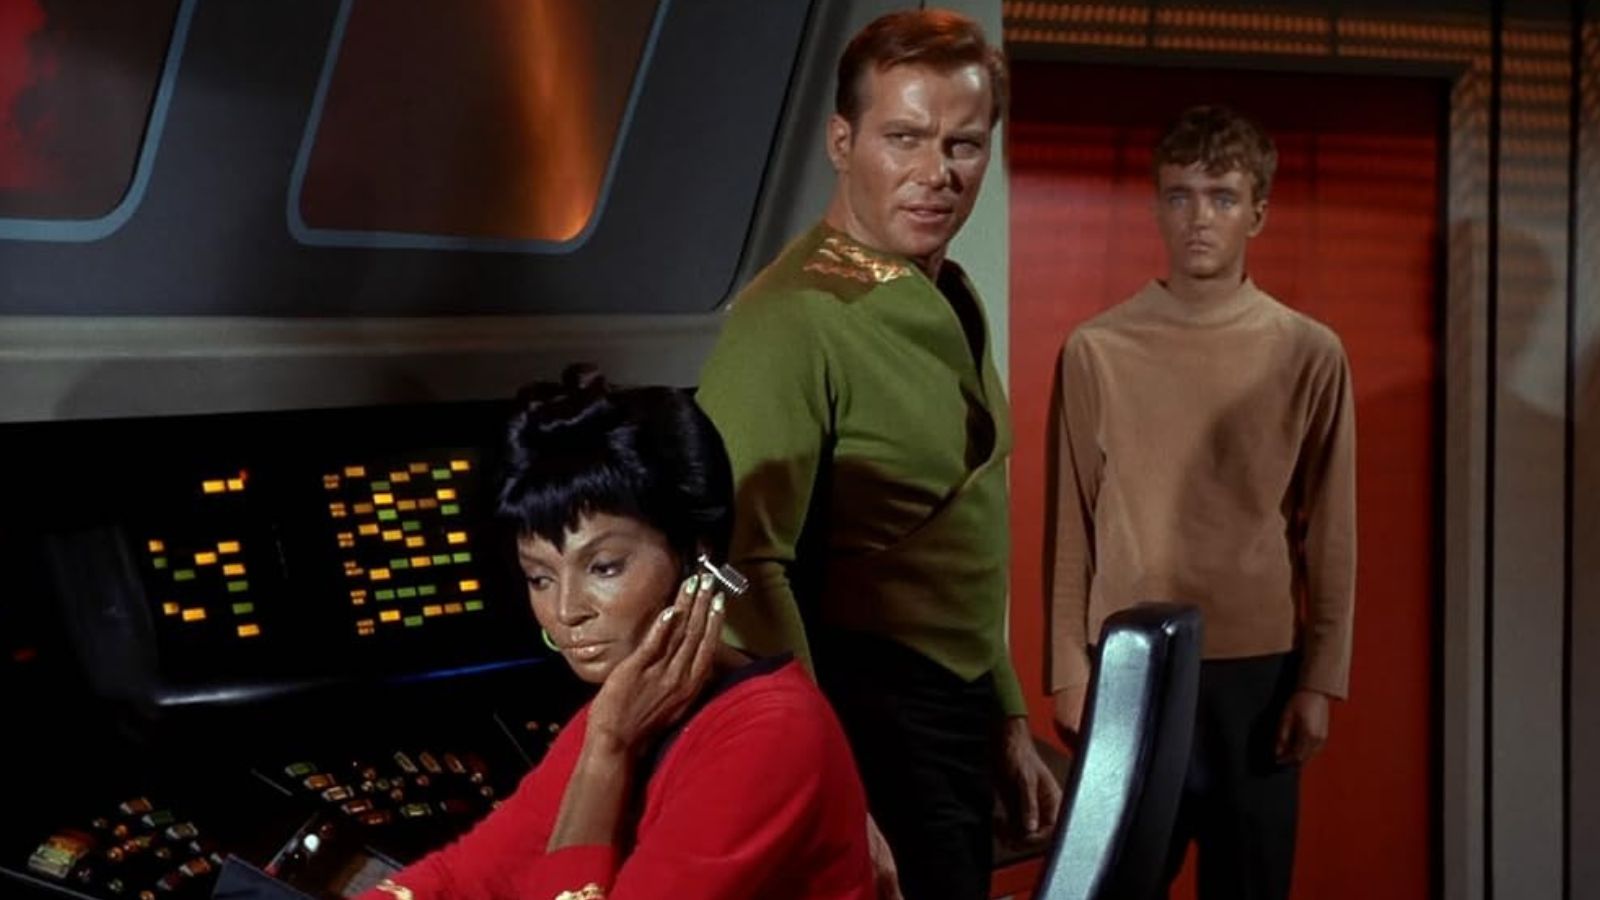 <span>Unfortunately, Captain Kirk and Spock developed tinnitus after a loud explosion during filming. Tinnitus is a persistent ringing and buzzing in the ears that can be a truly debilitating condition for some.  </span>  <a class="editor-rtfLink" href="https://www.theaquarian.com/2016/01/27/getting-the-shatner-treatment-an-interview-with-william-shatner/" rel="noopener"><span>William Shatner </span></a><span>even became the official spokesperson for tinnitus at one point, which both actors struggled with, particularly Shatner. </span>